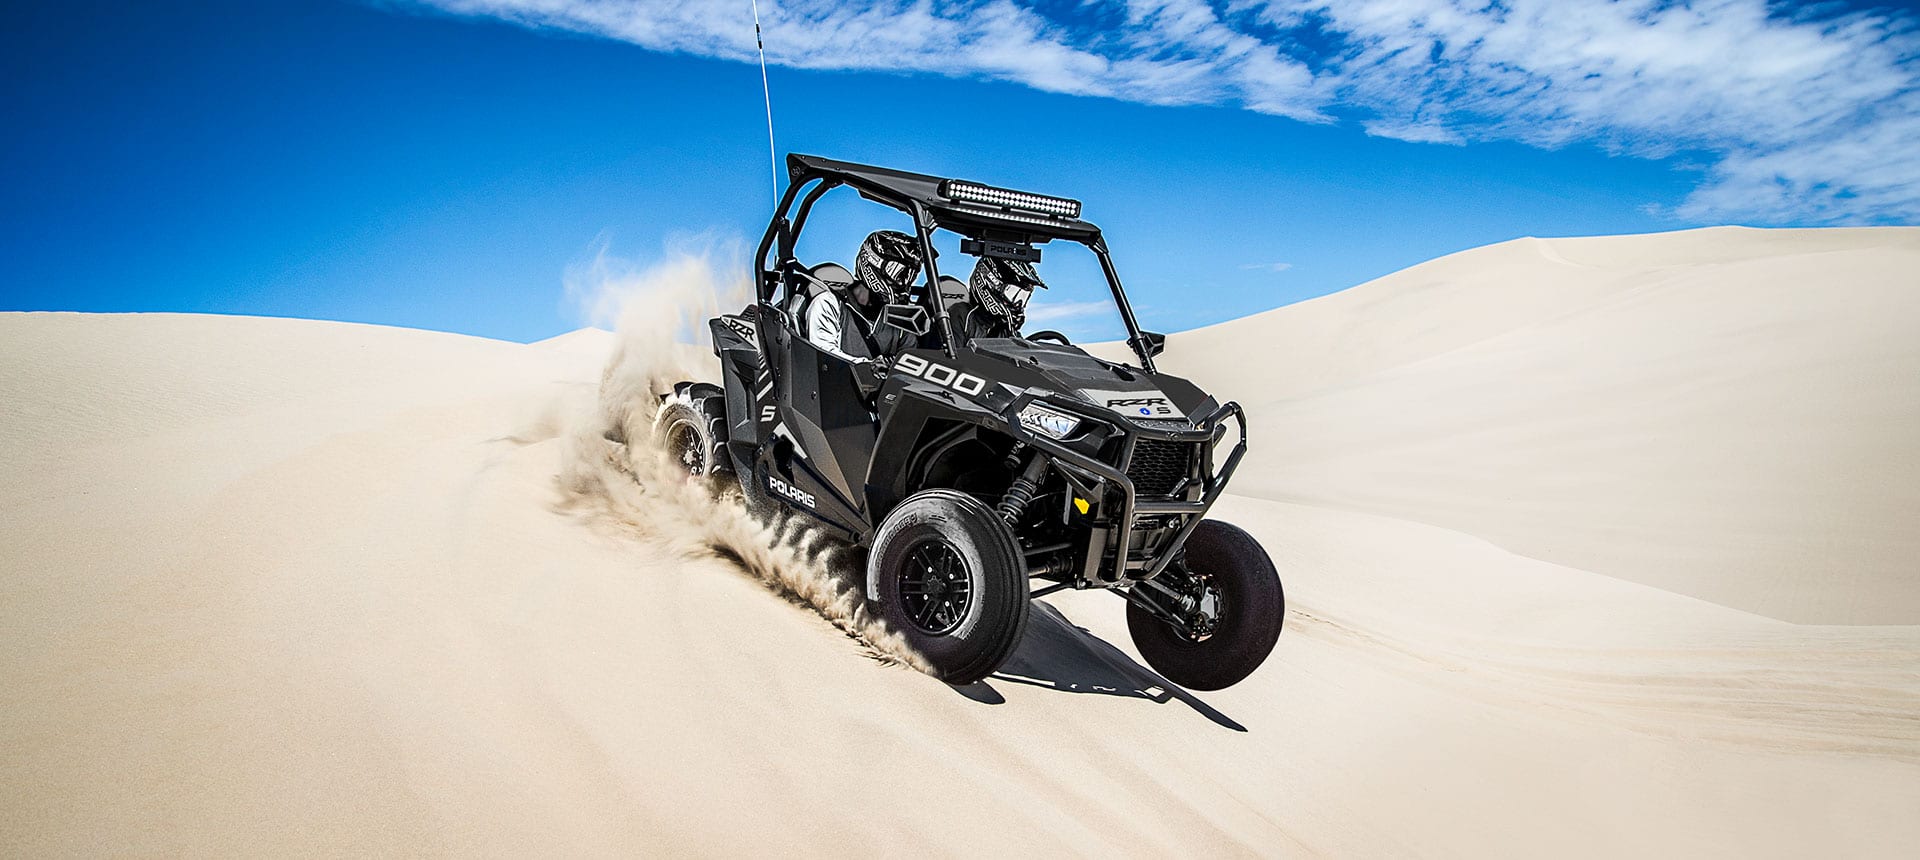 RZR S 900 OFFROAD VEHICLE